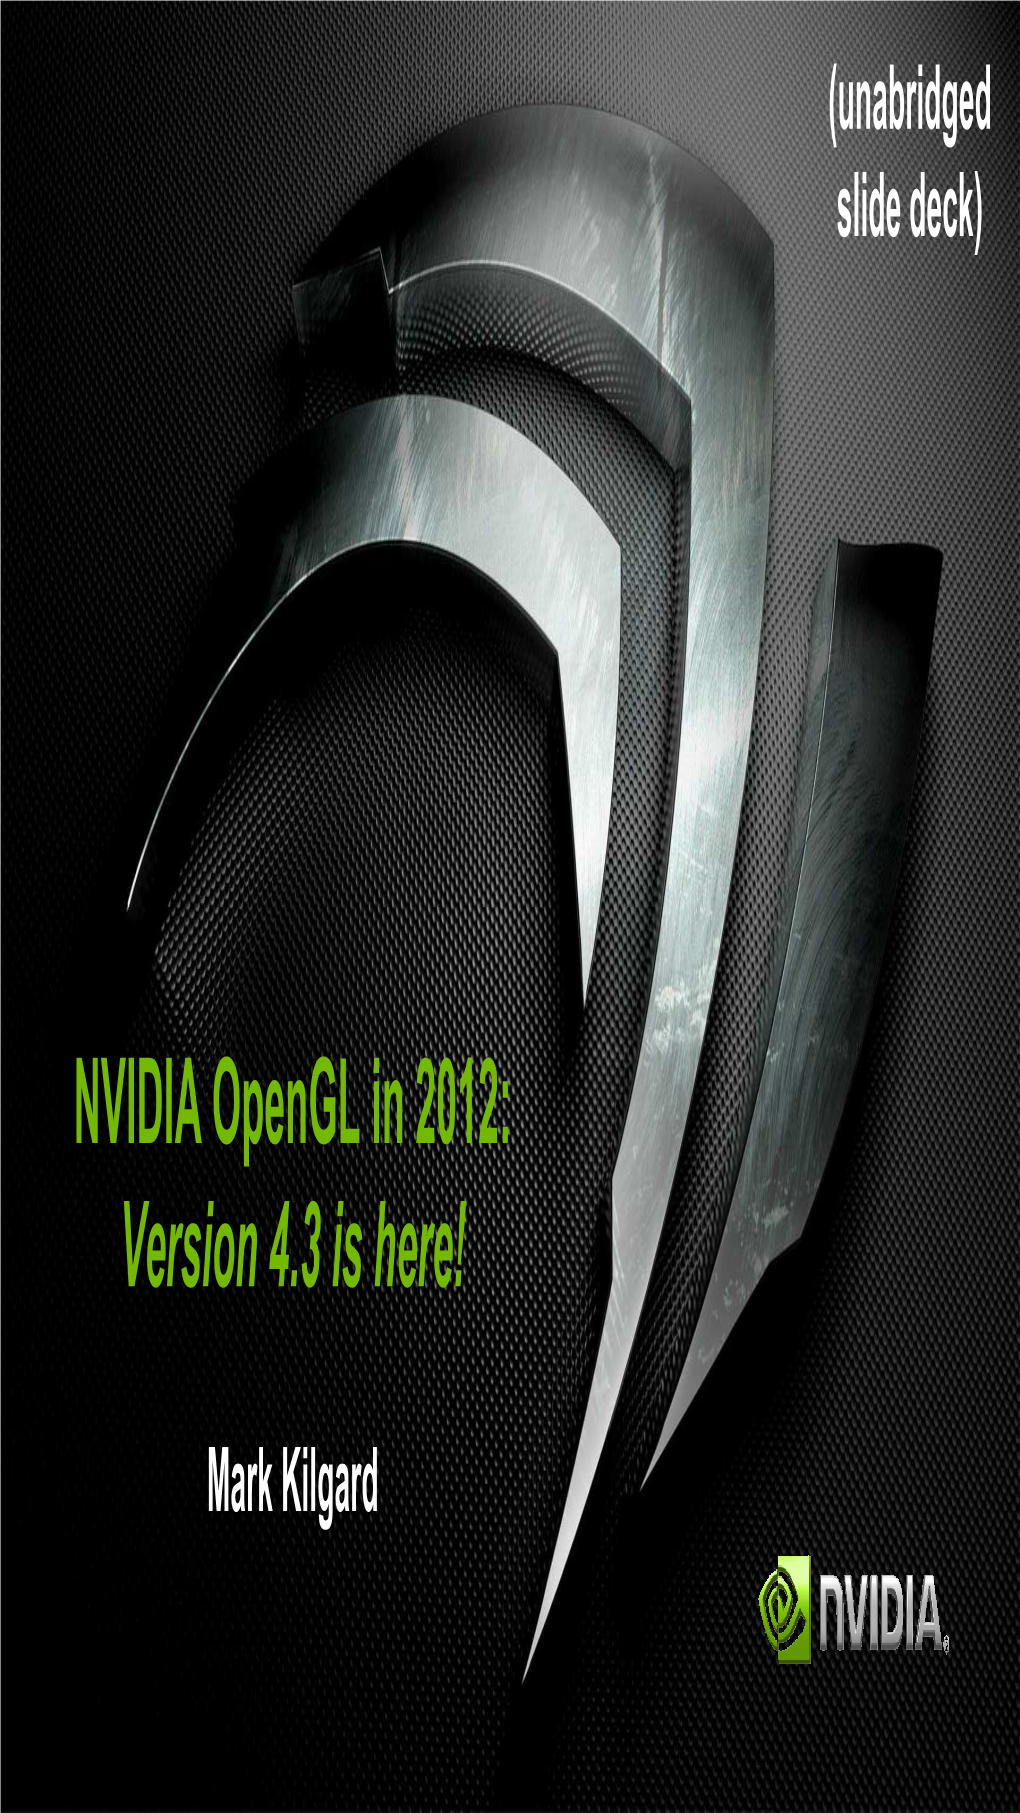 NVIDIA Opengl in 2012: Version 4.3 Is Here!